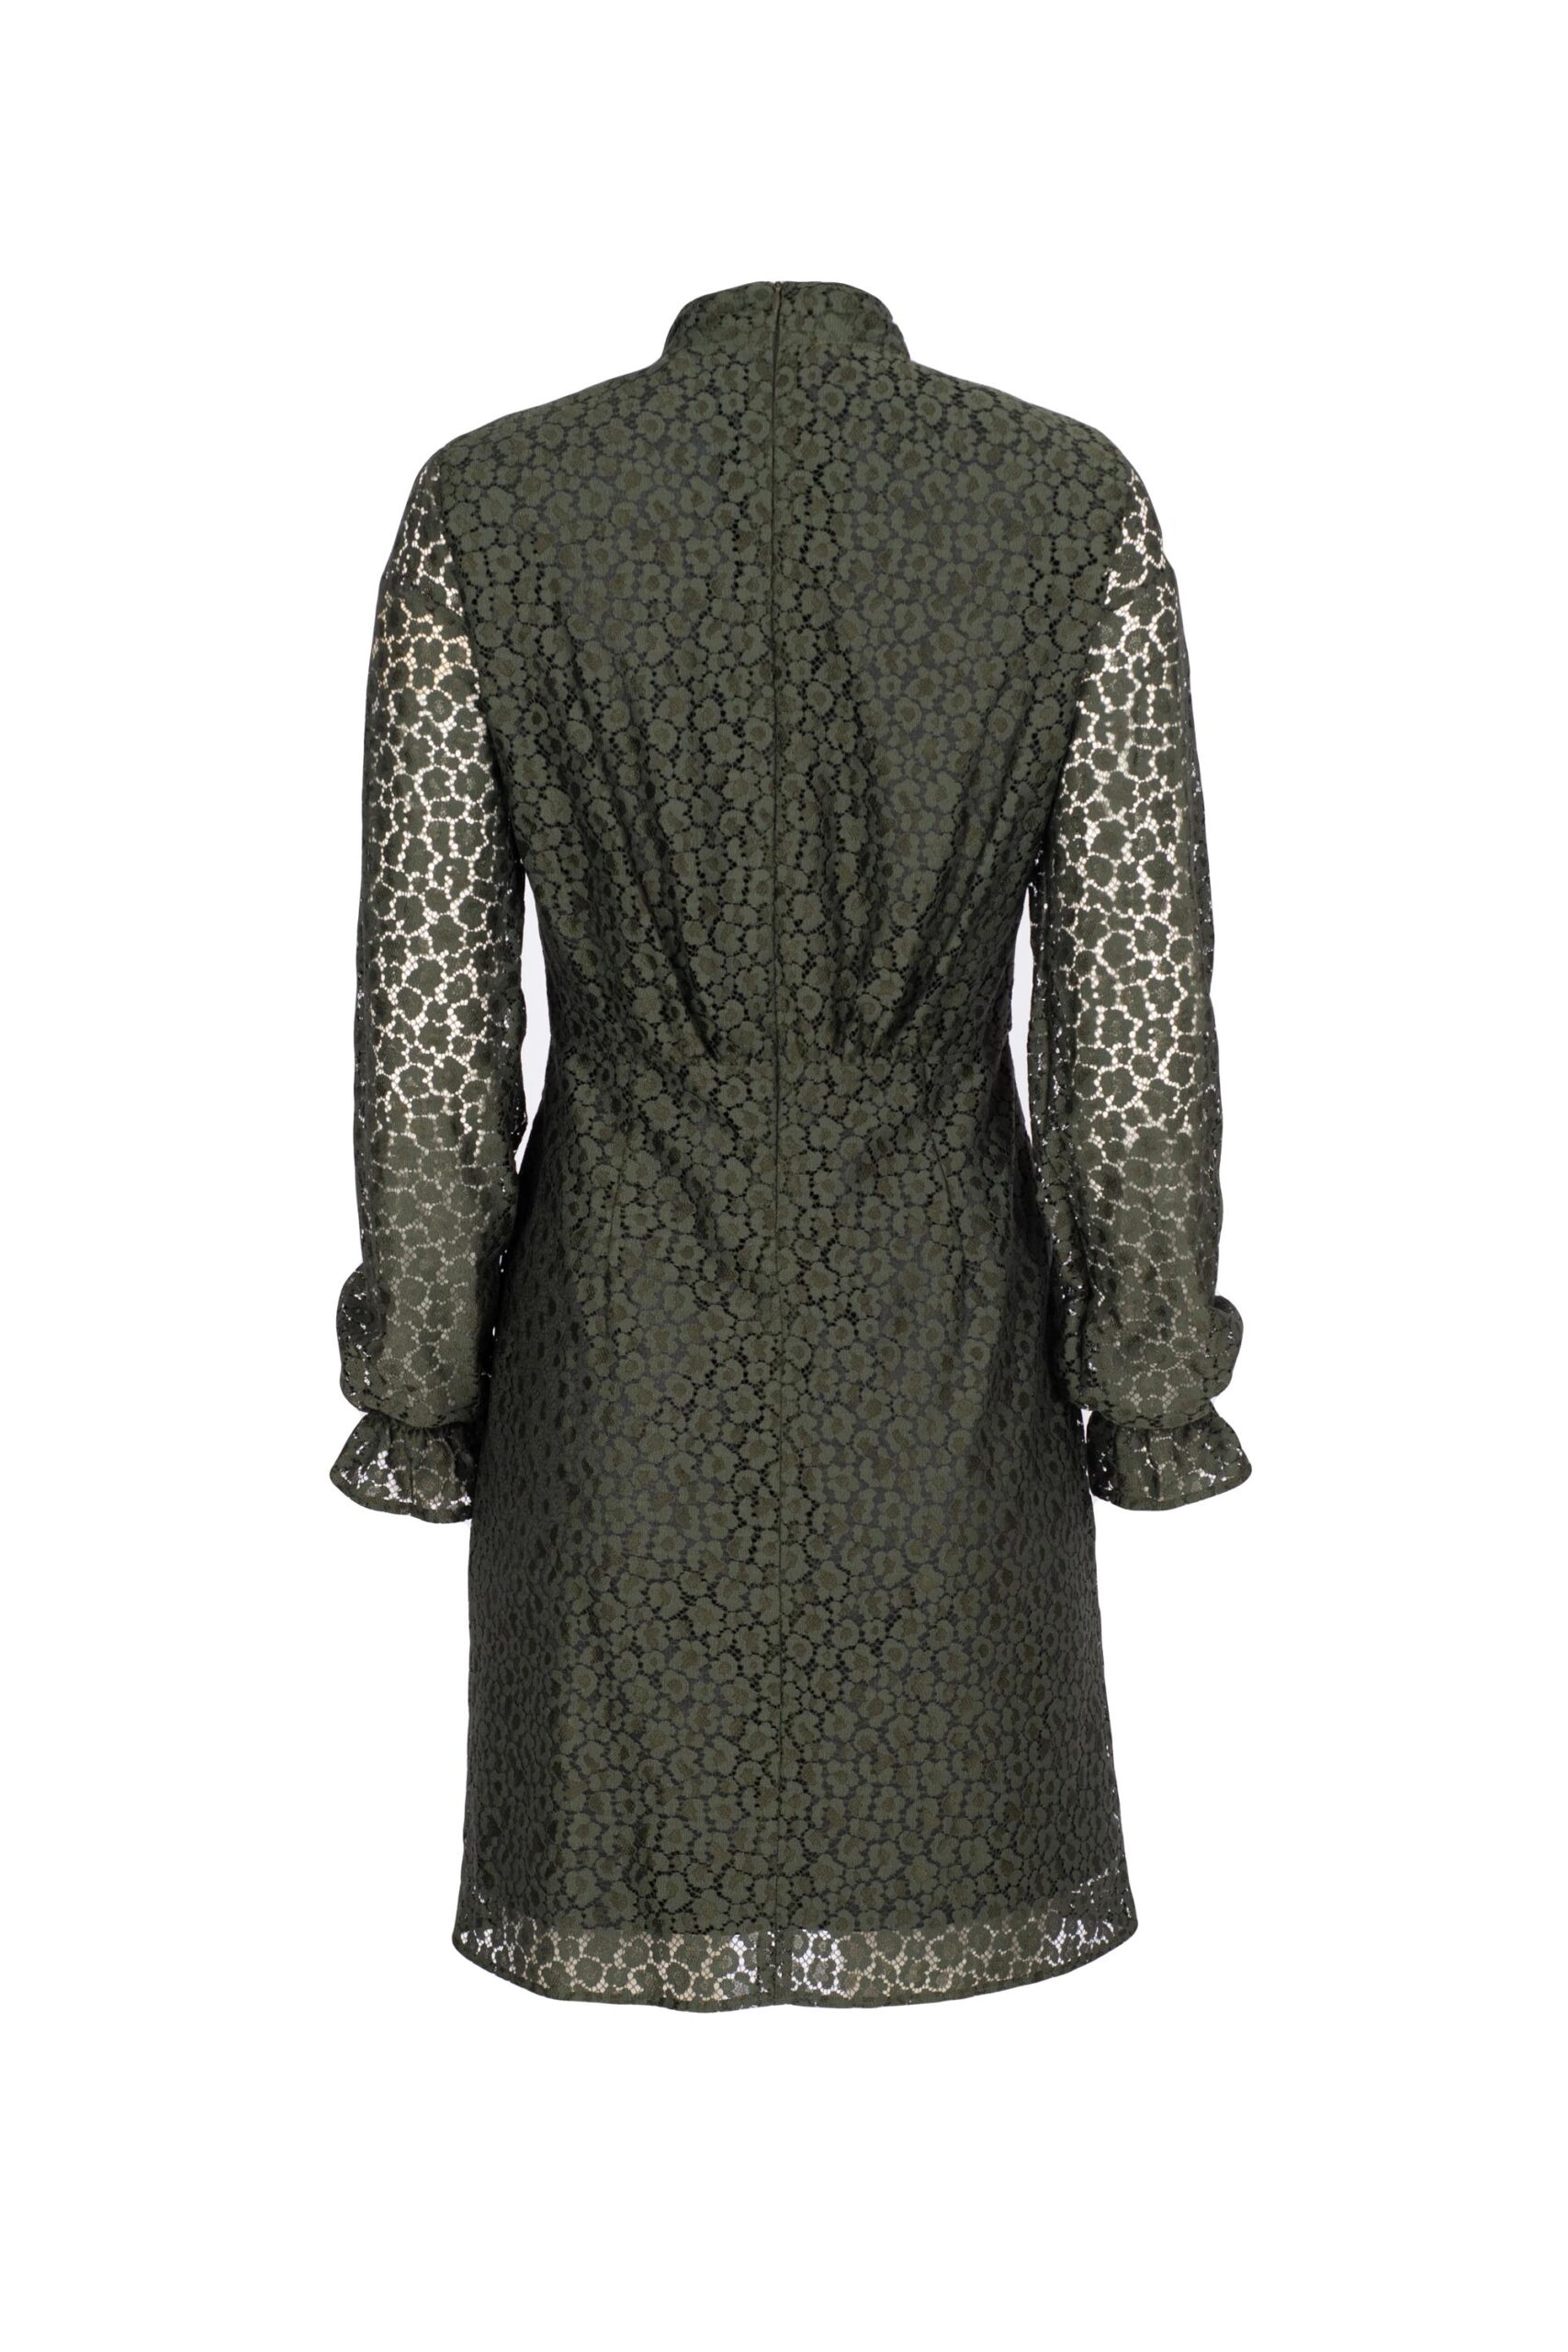 Lace Victorian Style Dress with Waist Ruching